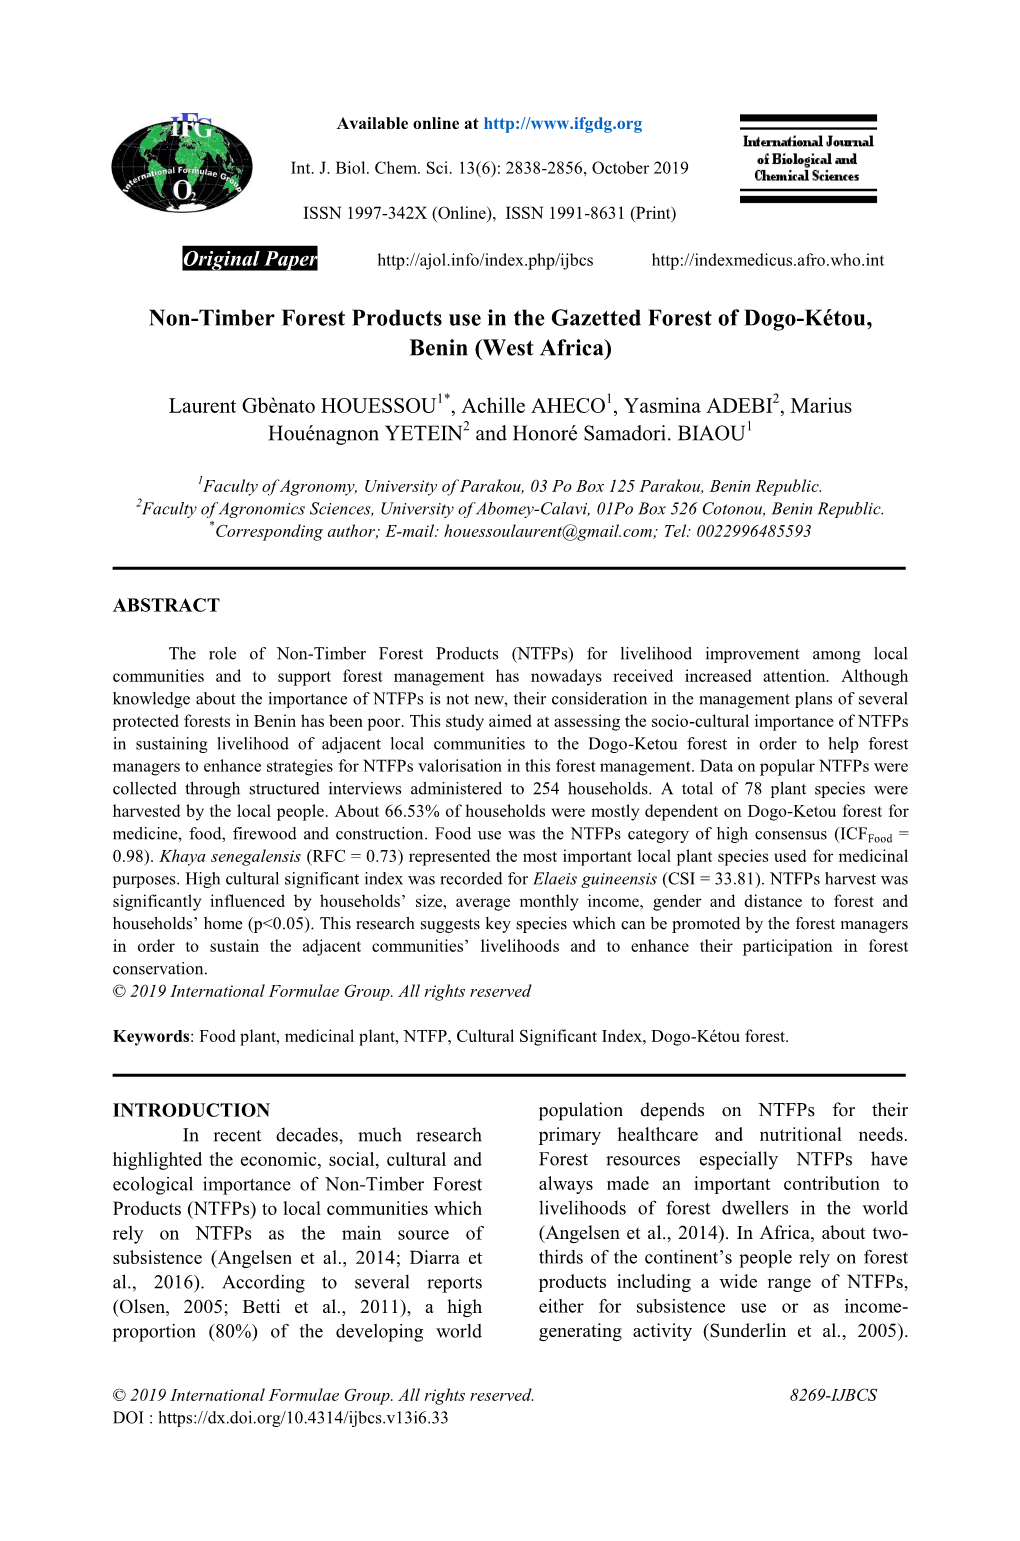 Non-Timber Forest Products Use in the Gazetted Forest of Dogo-Kétou, Benin (West Africa)